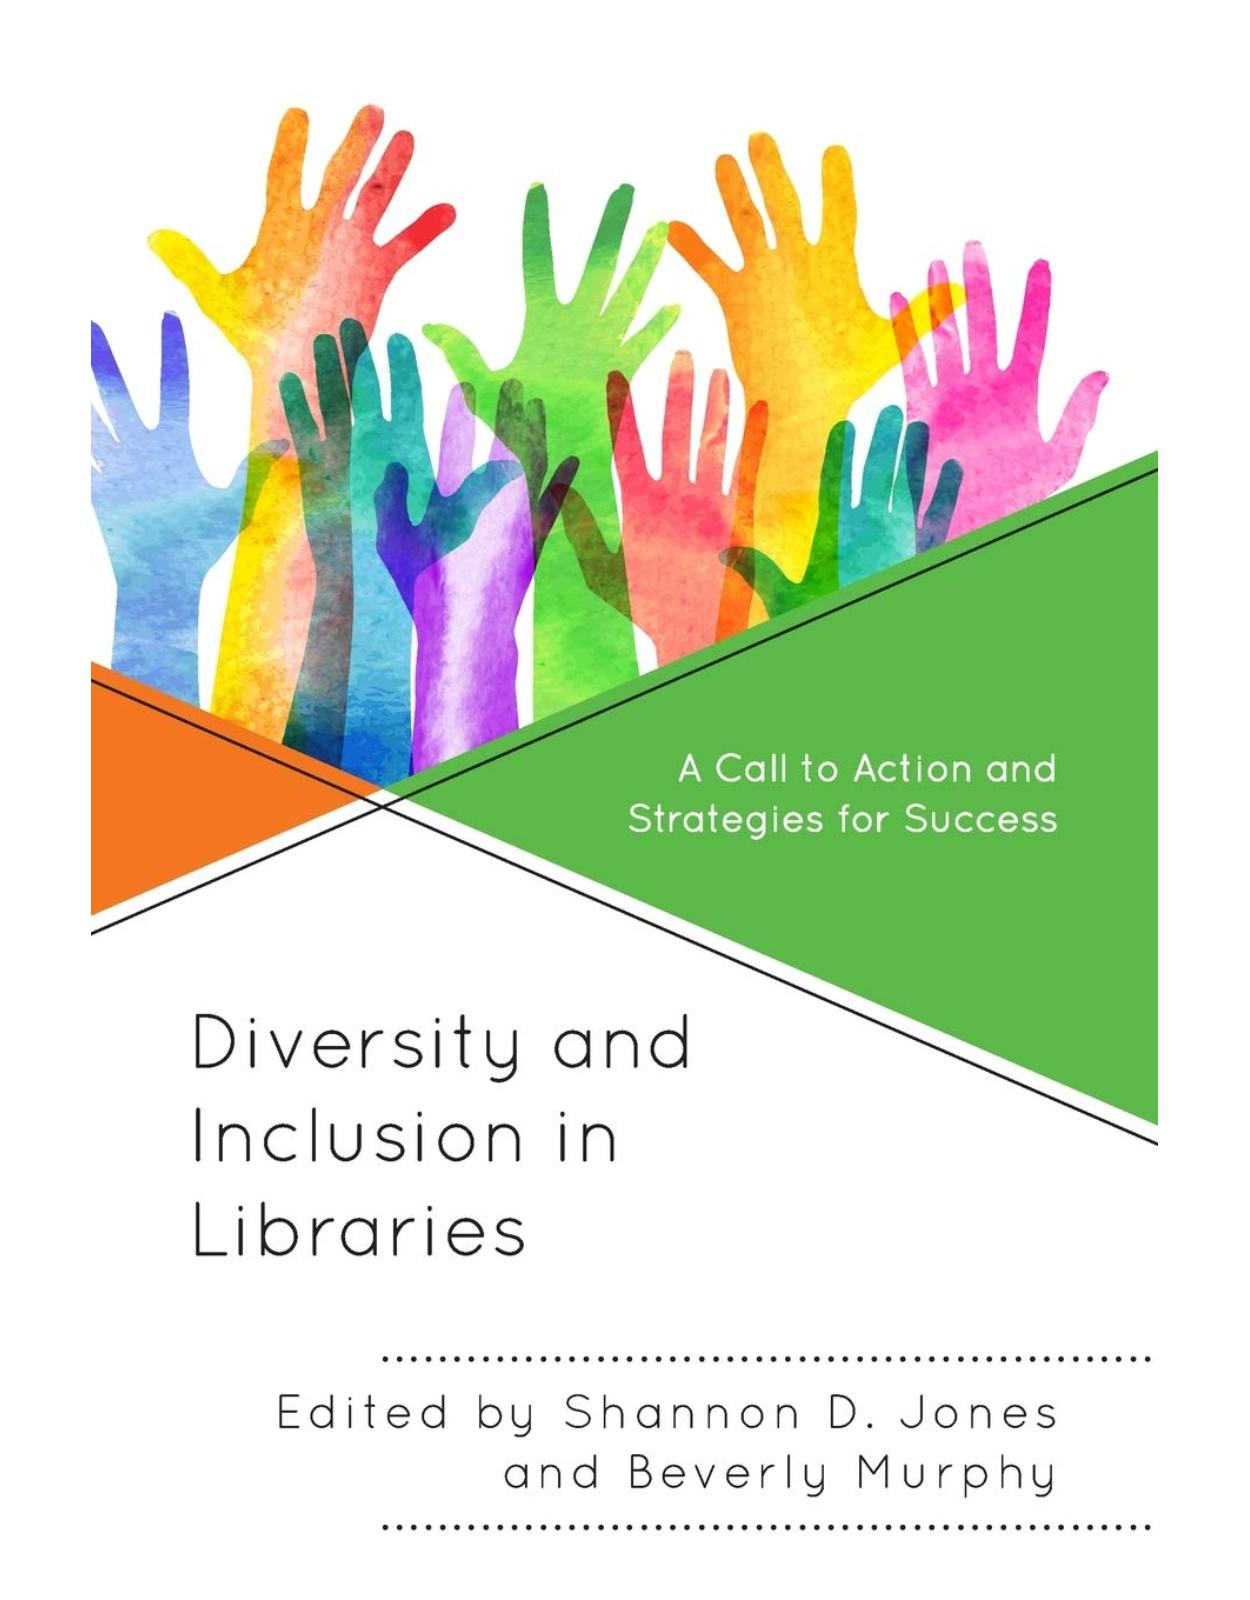 Diversity and Inclusion in Libraries. A Call to Action and Strategies for Success